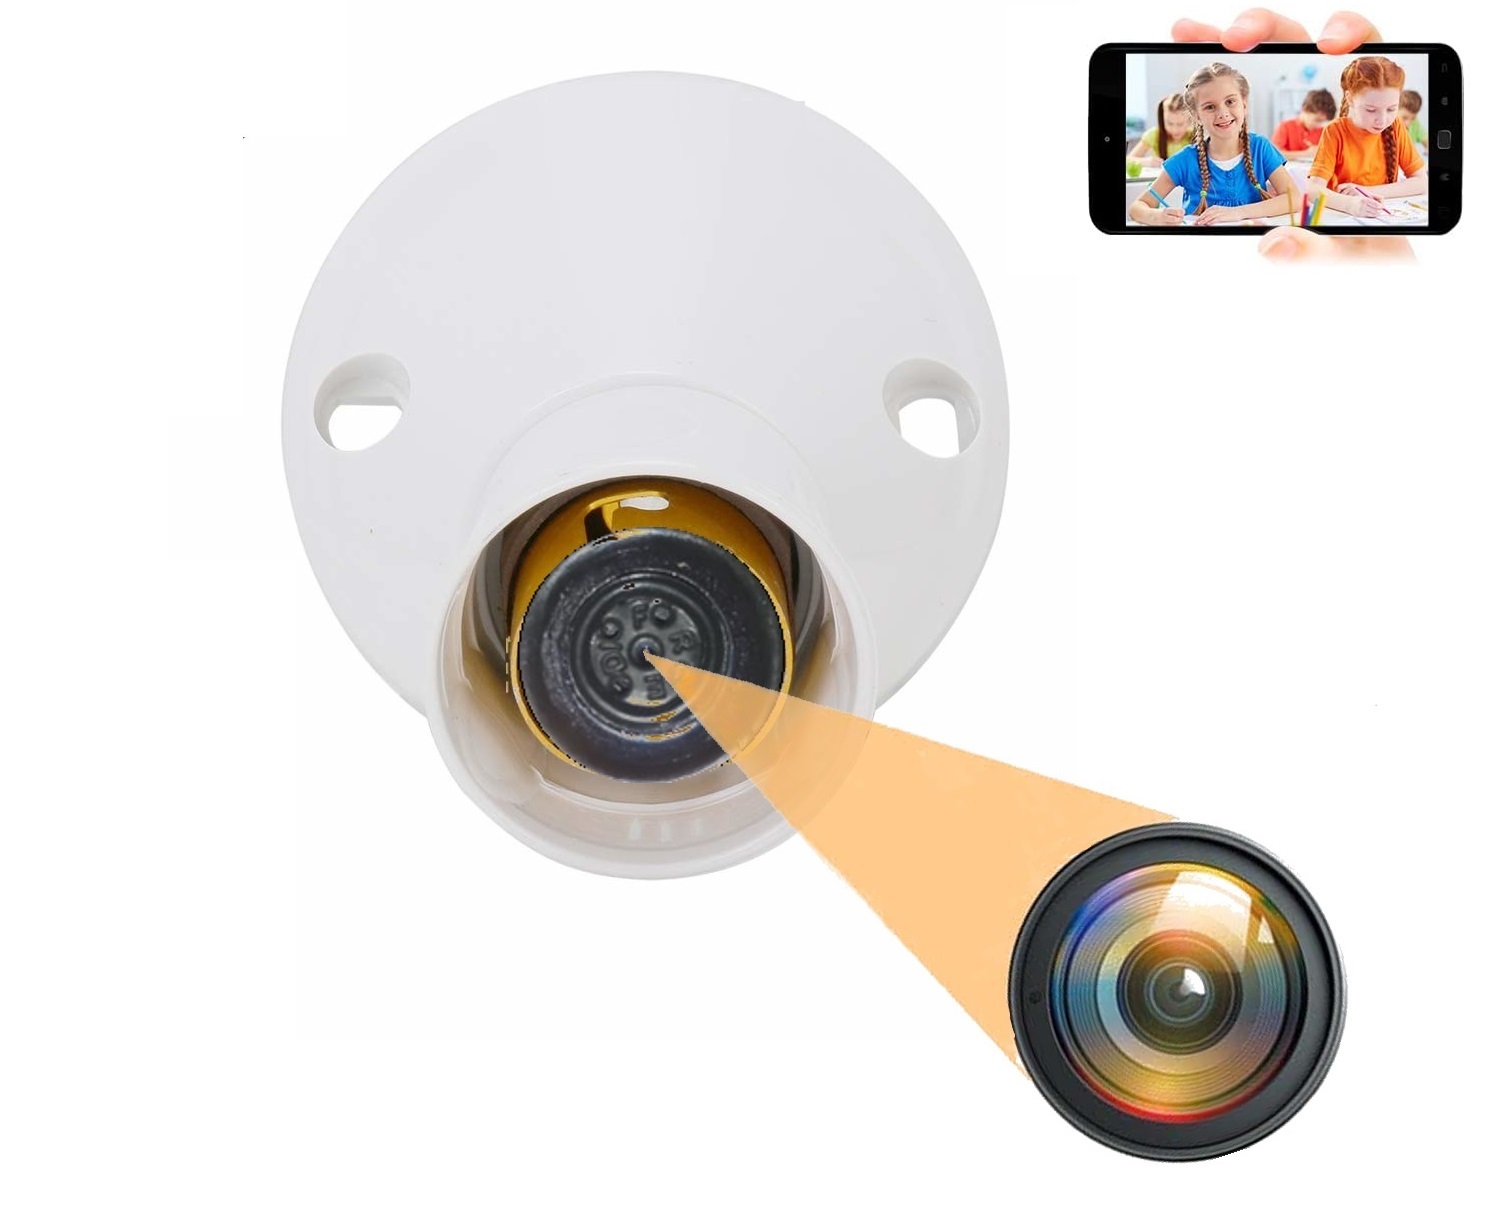 CAM 360 Hottest 4K WiFi Holder Camera in Model HD Audio Video Recording Watch Live 24 Hours Small Surveillance Security Camera for Home Nanny Hidden Wireless Camera